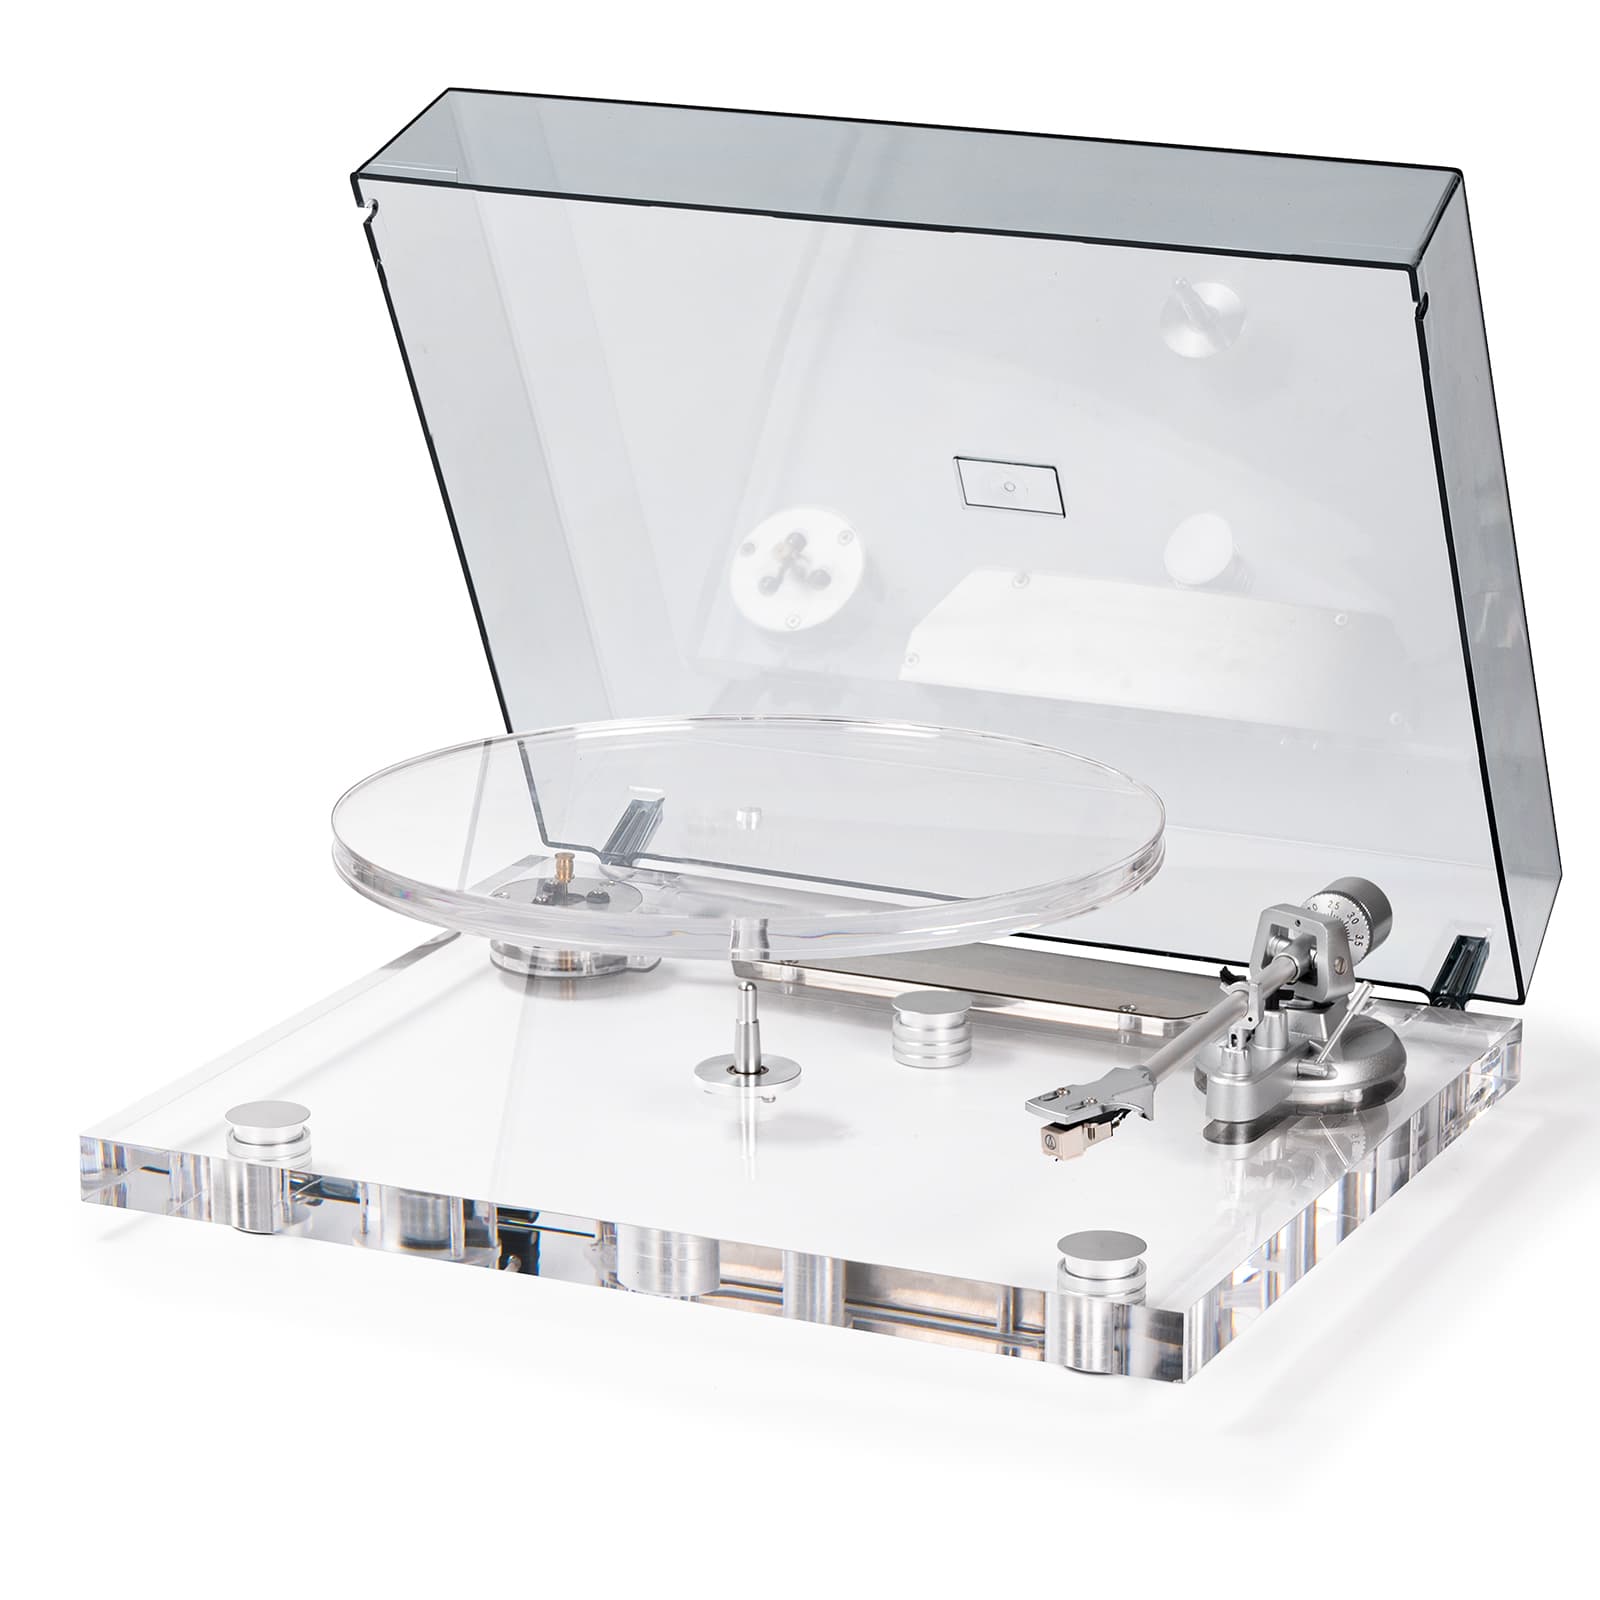 Acrylic Platter Adapted to ICE Series Vinyl Turntables